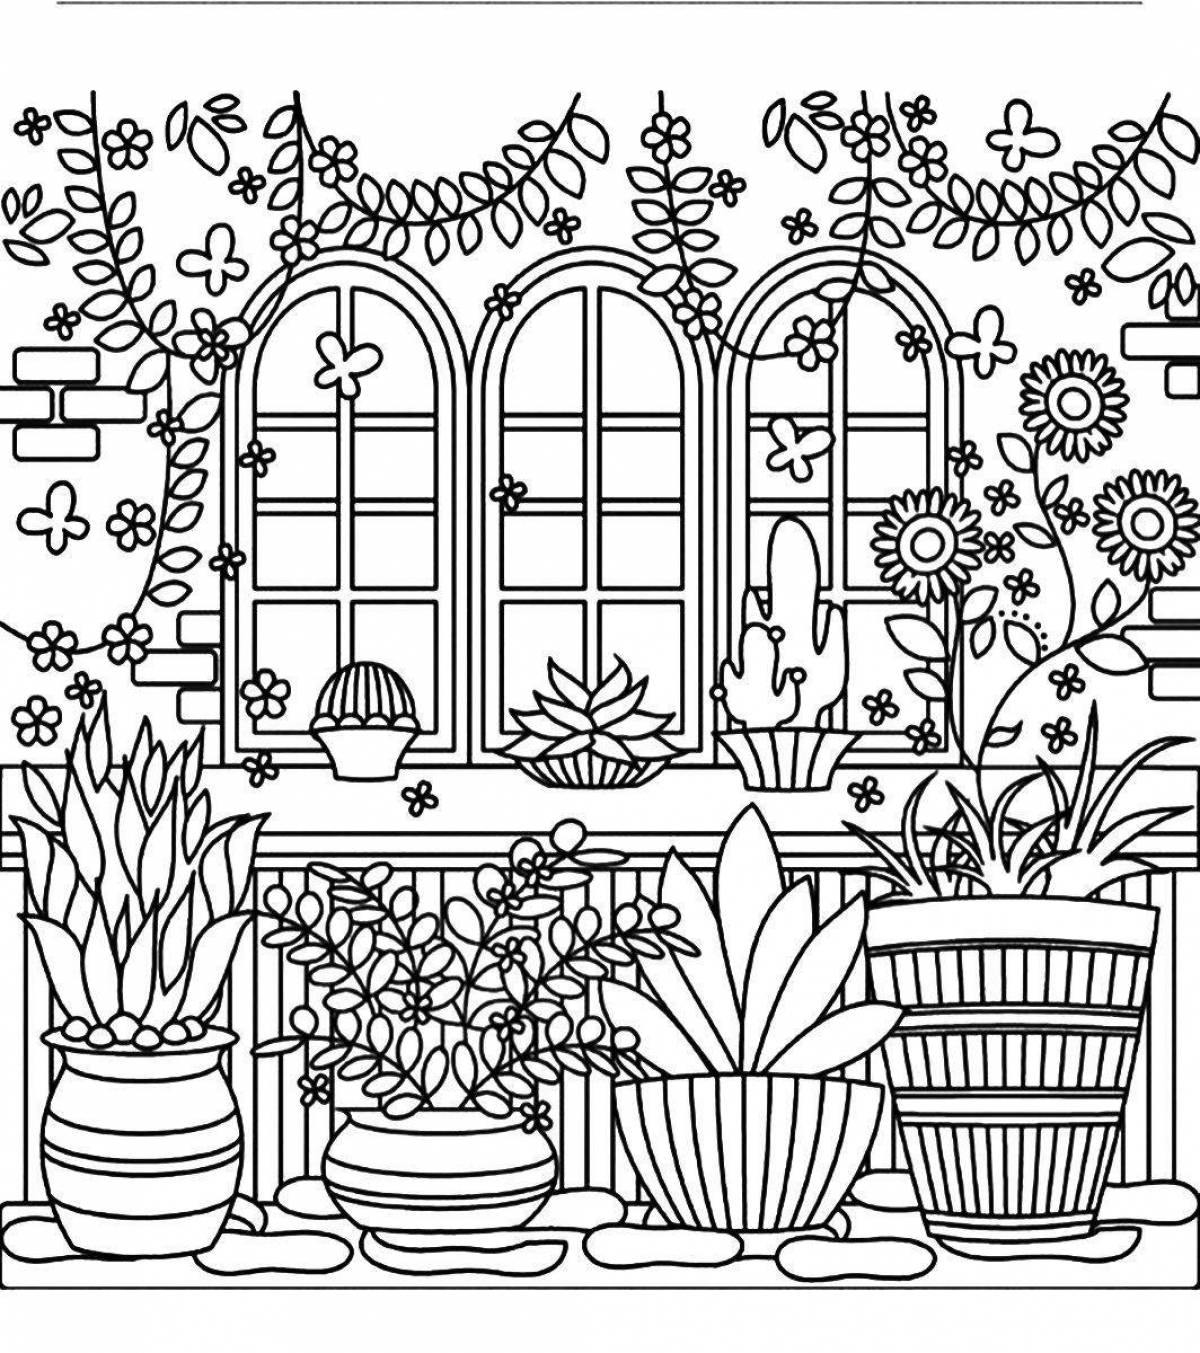 Colorful coloring book for room decor